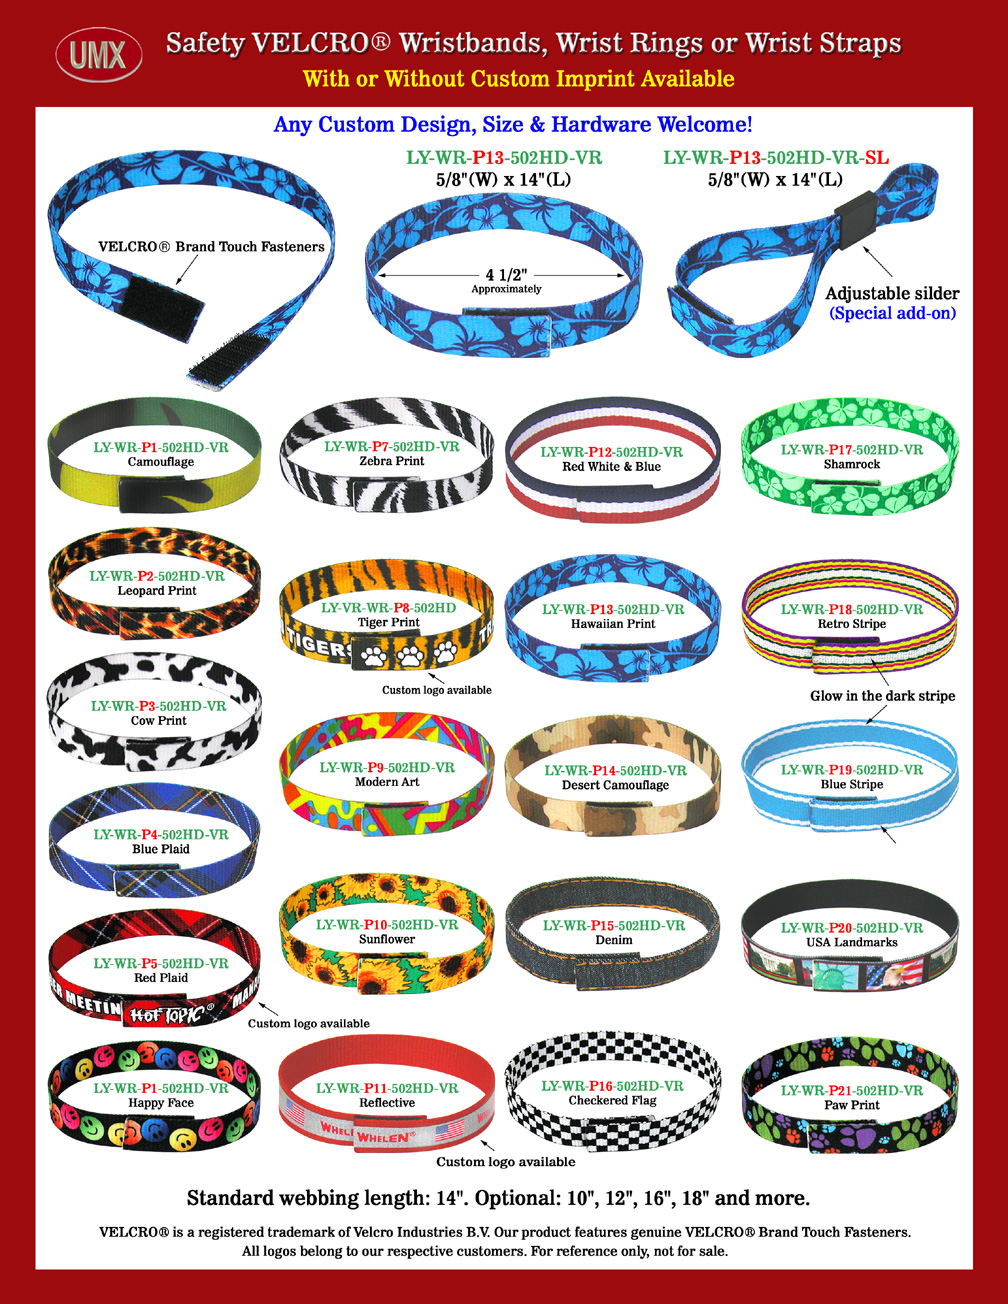 5/8" Funny And Unique Velcro Safety Wrist Band, Strap or Ring Lanyards With Cool Pre-Printed Themes.